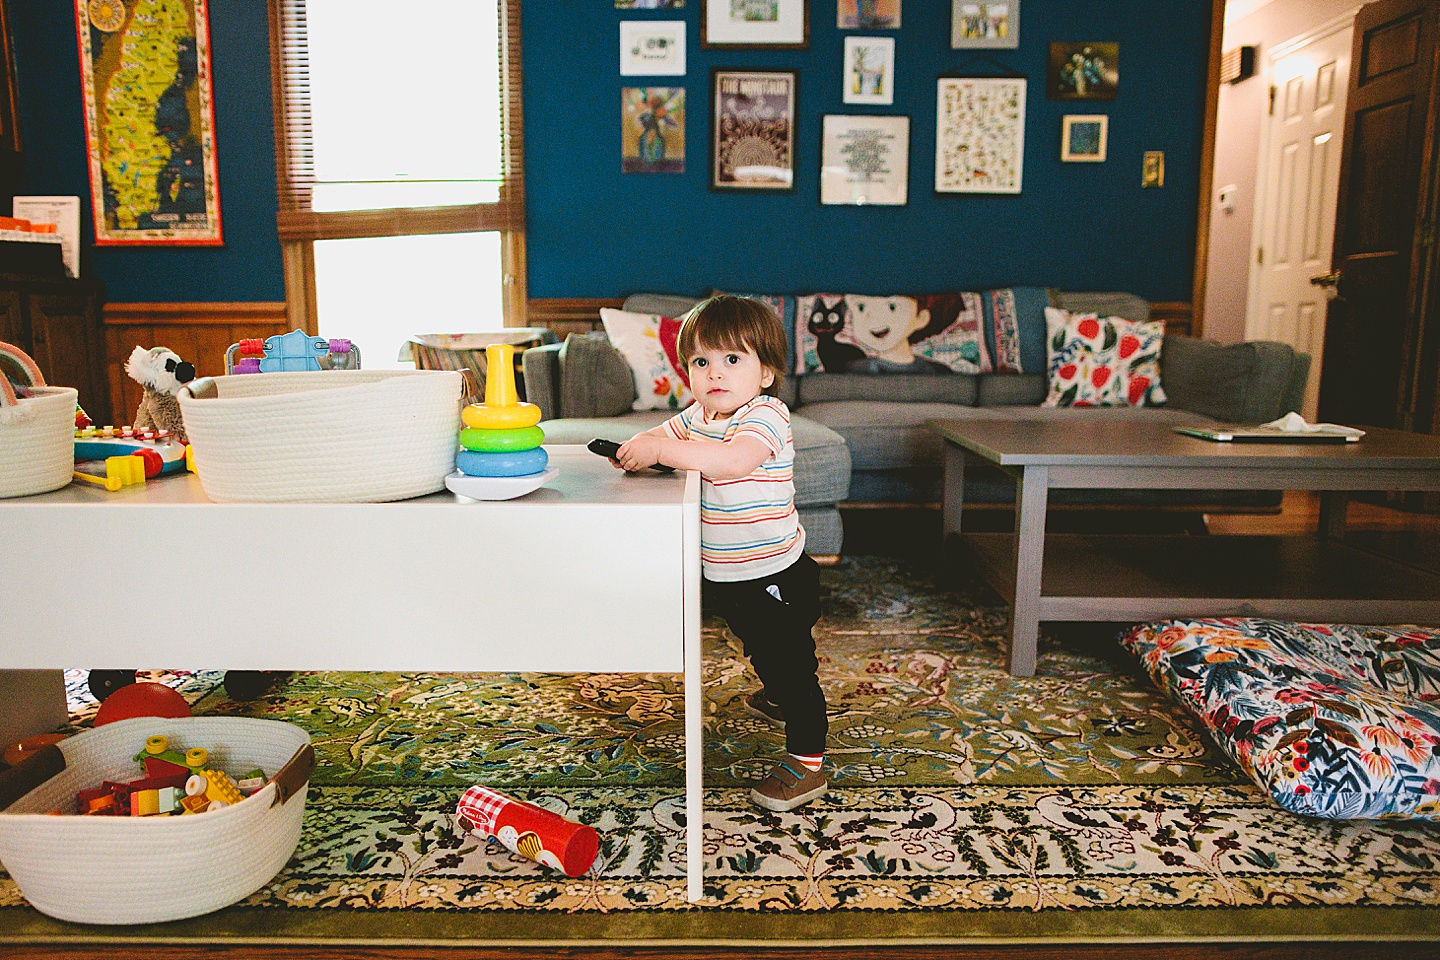 Toddler standing in living room holding remote control